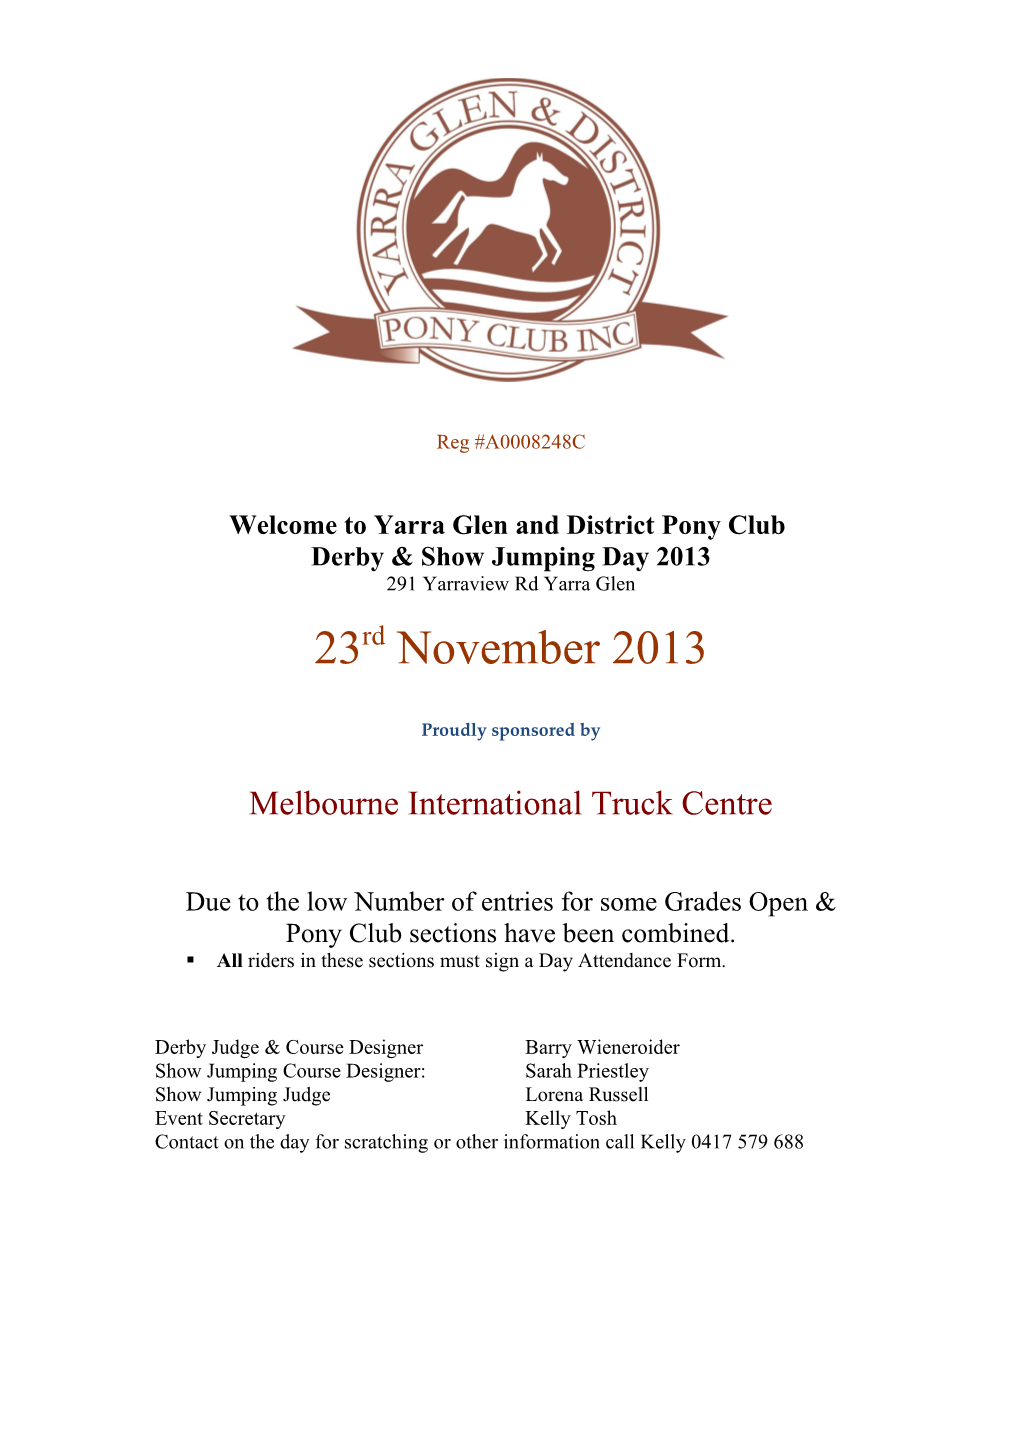 Welcome to Yarra Glen and District Pony Club